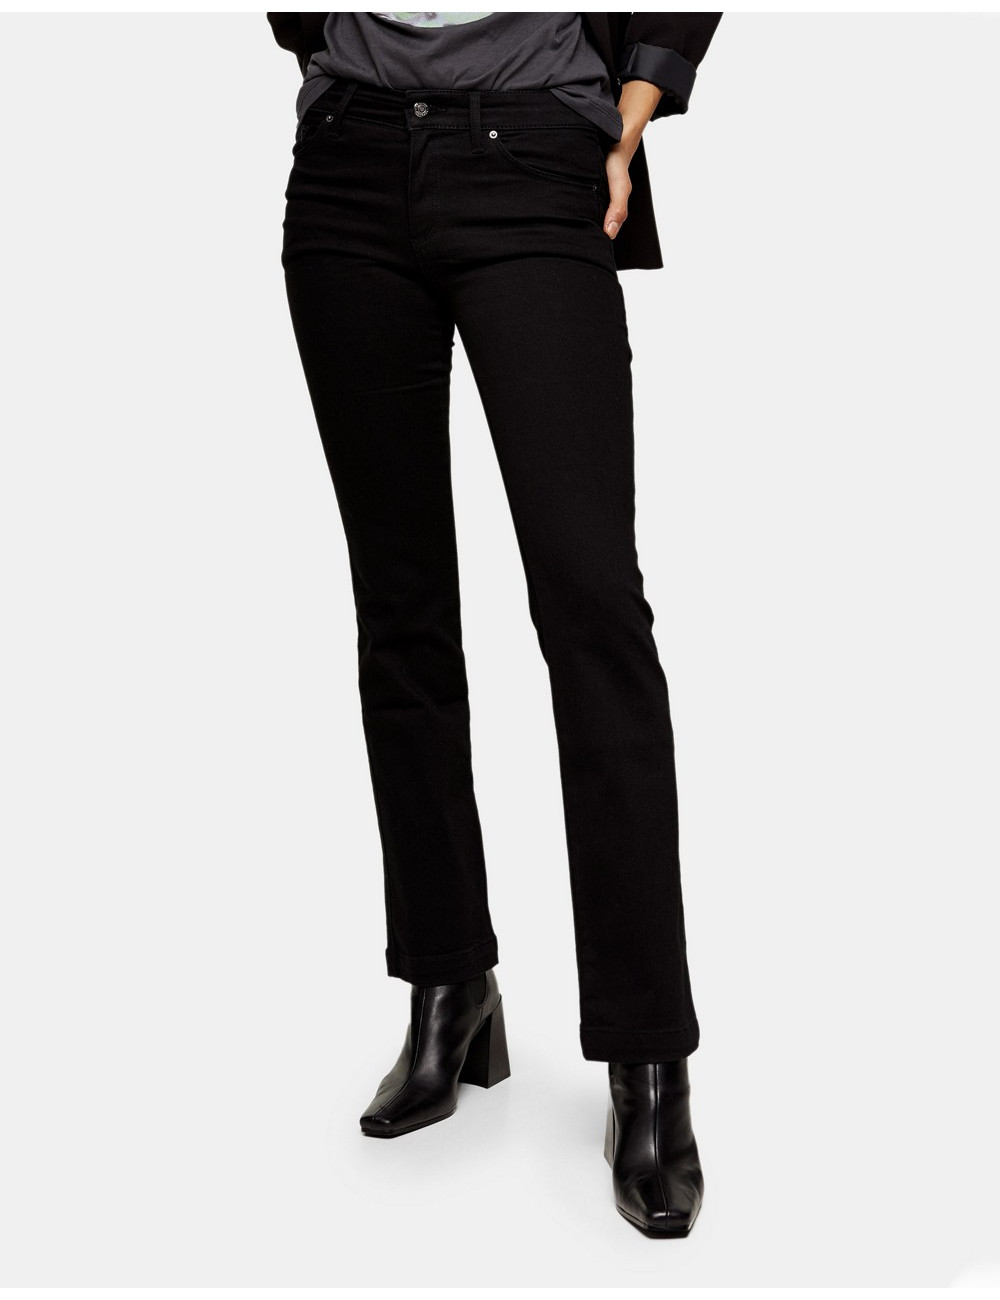 Topshop bootcut jeans in black